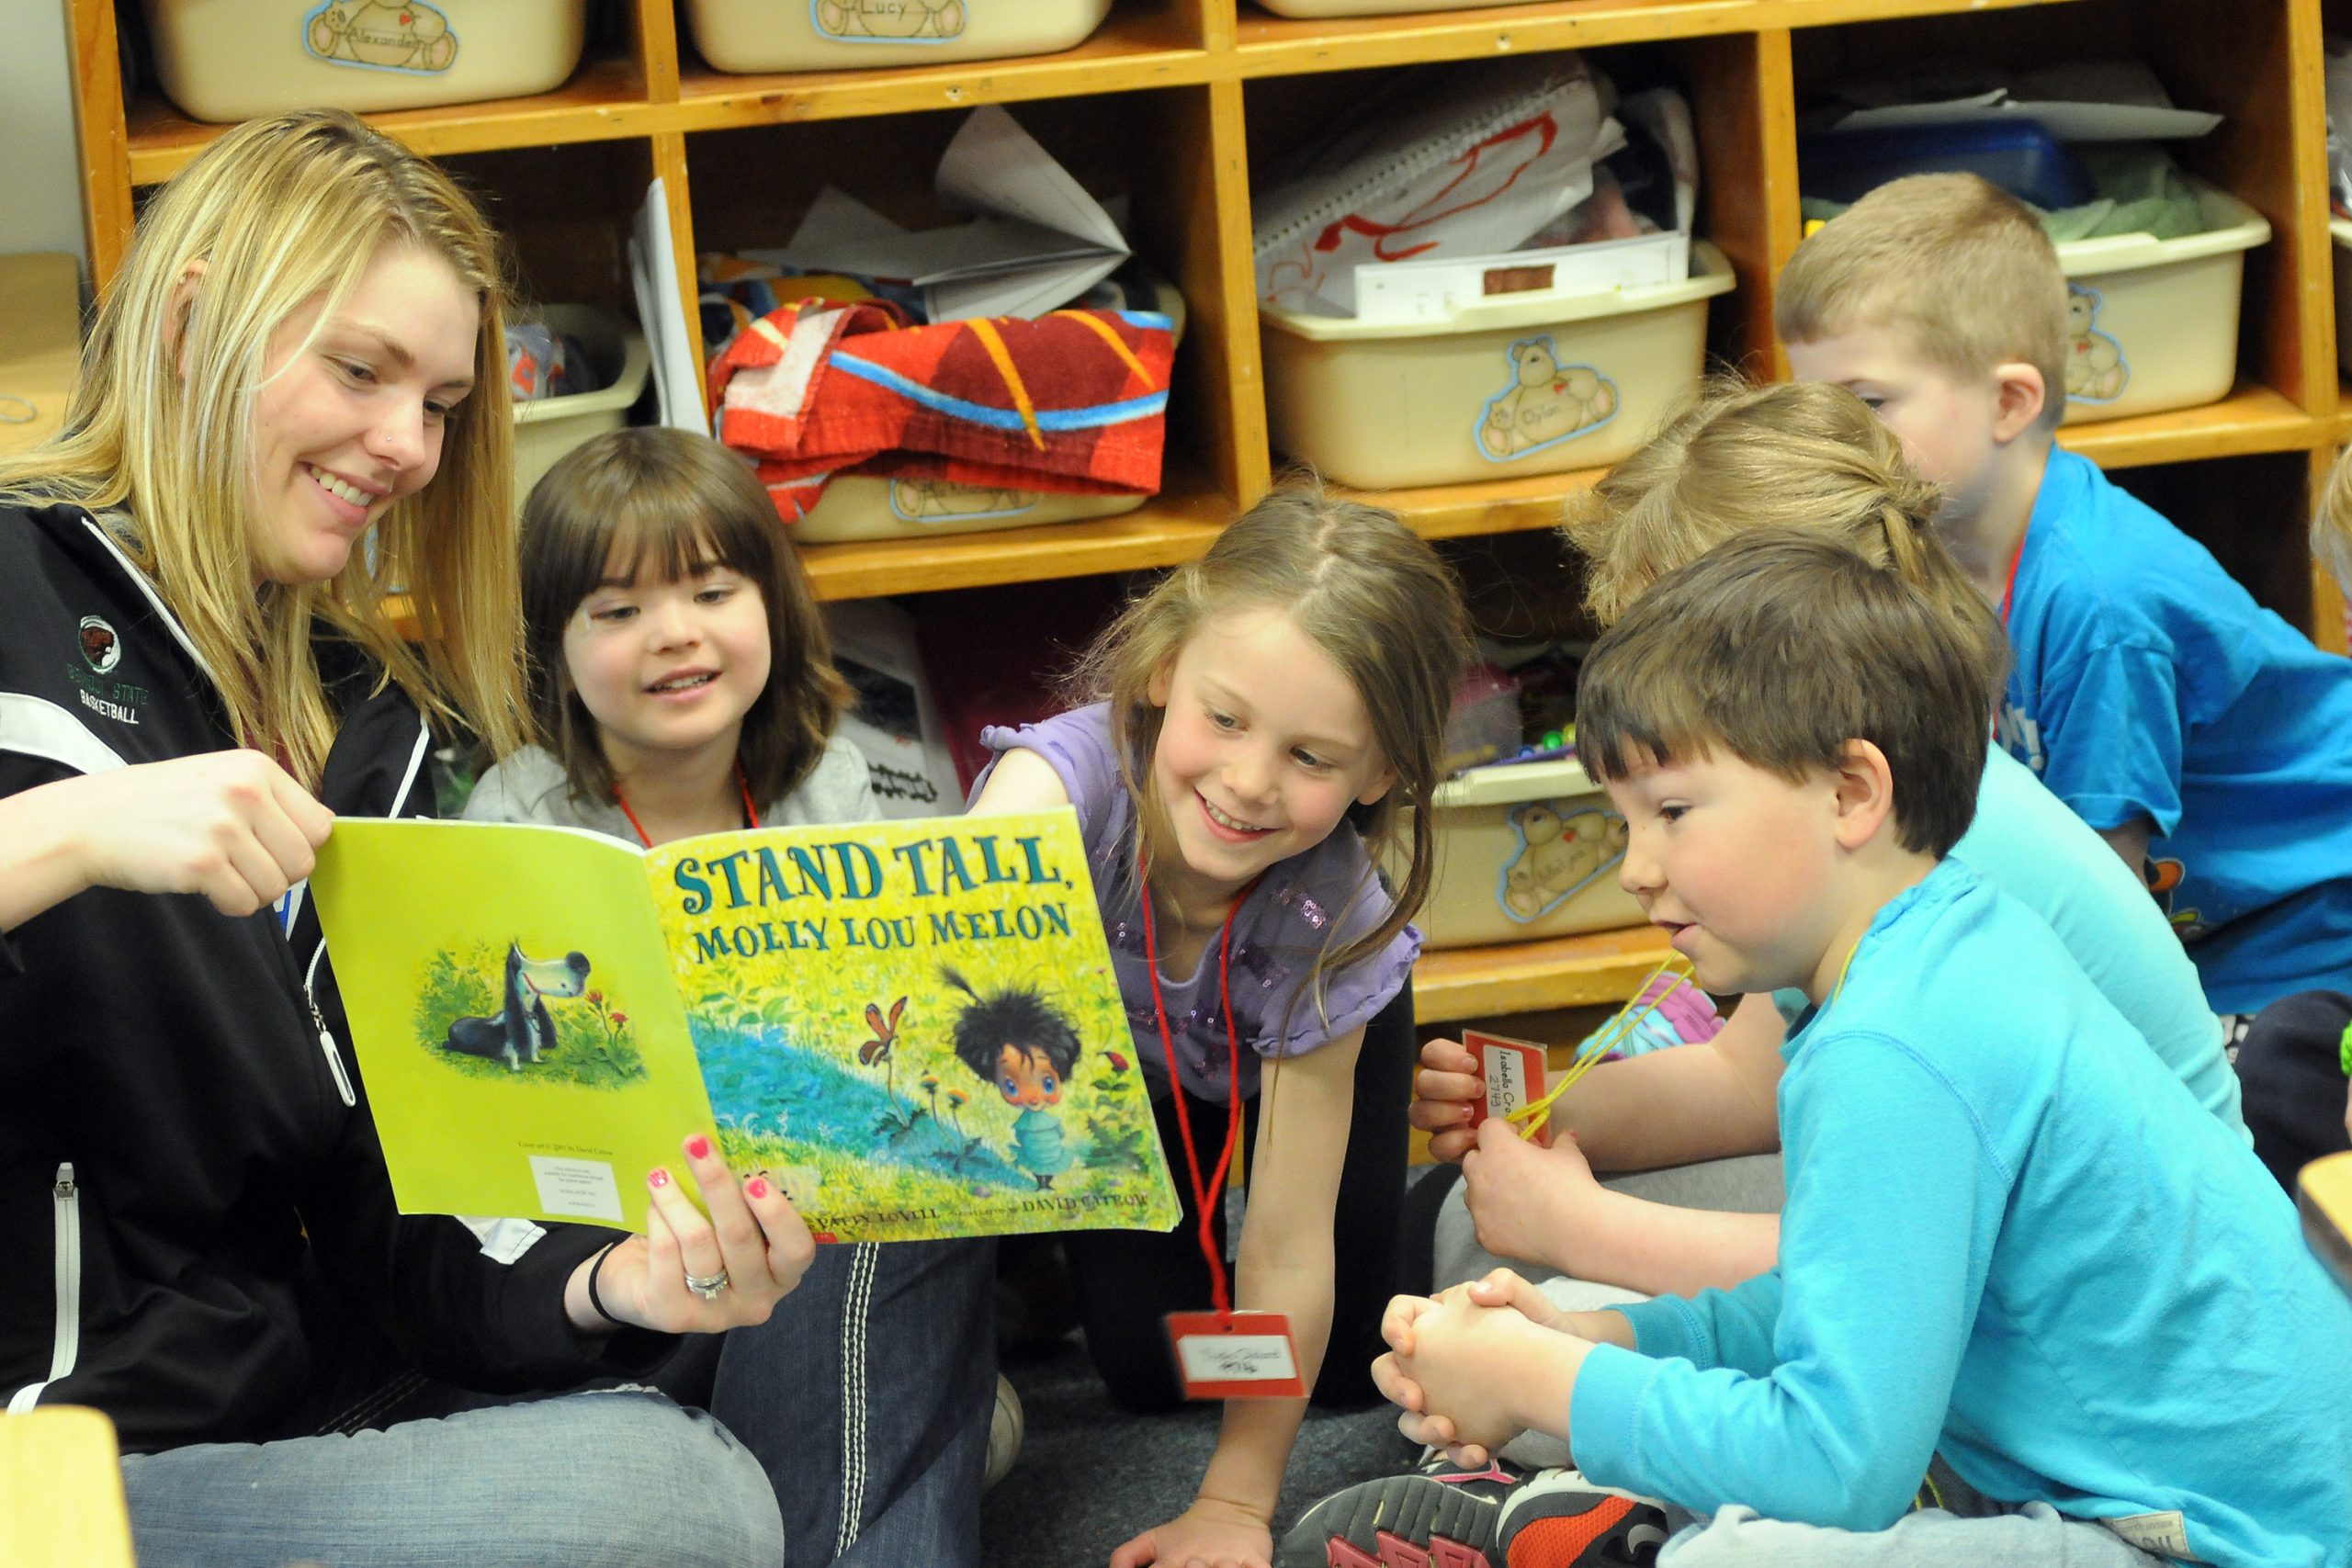 Teacher reading to a group of students from a book called "Stand Tall" by Molly Lou Melon